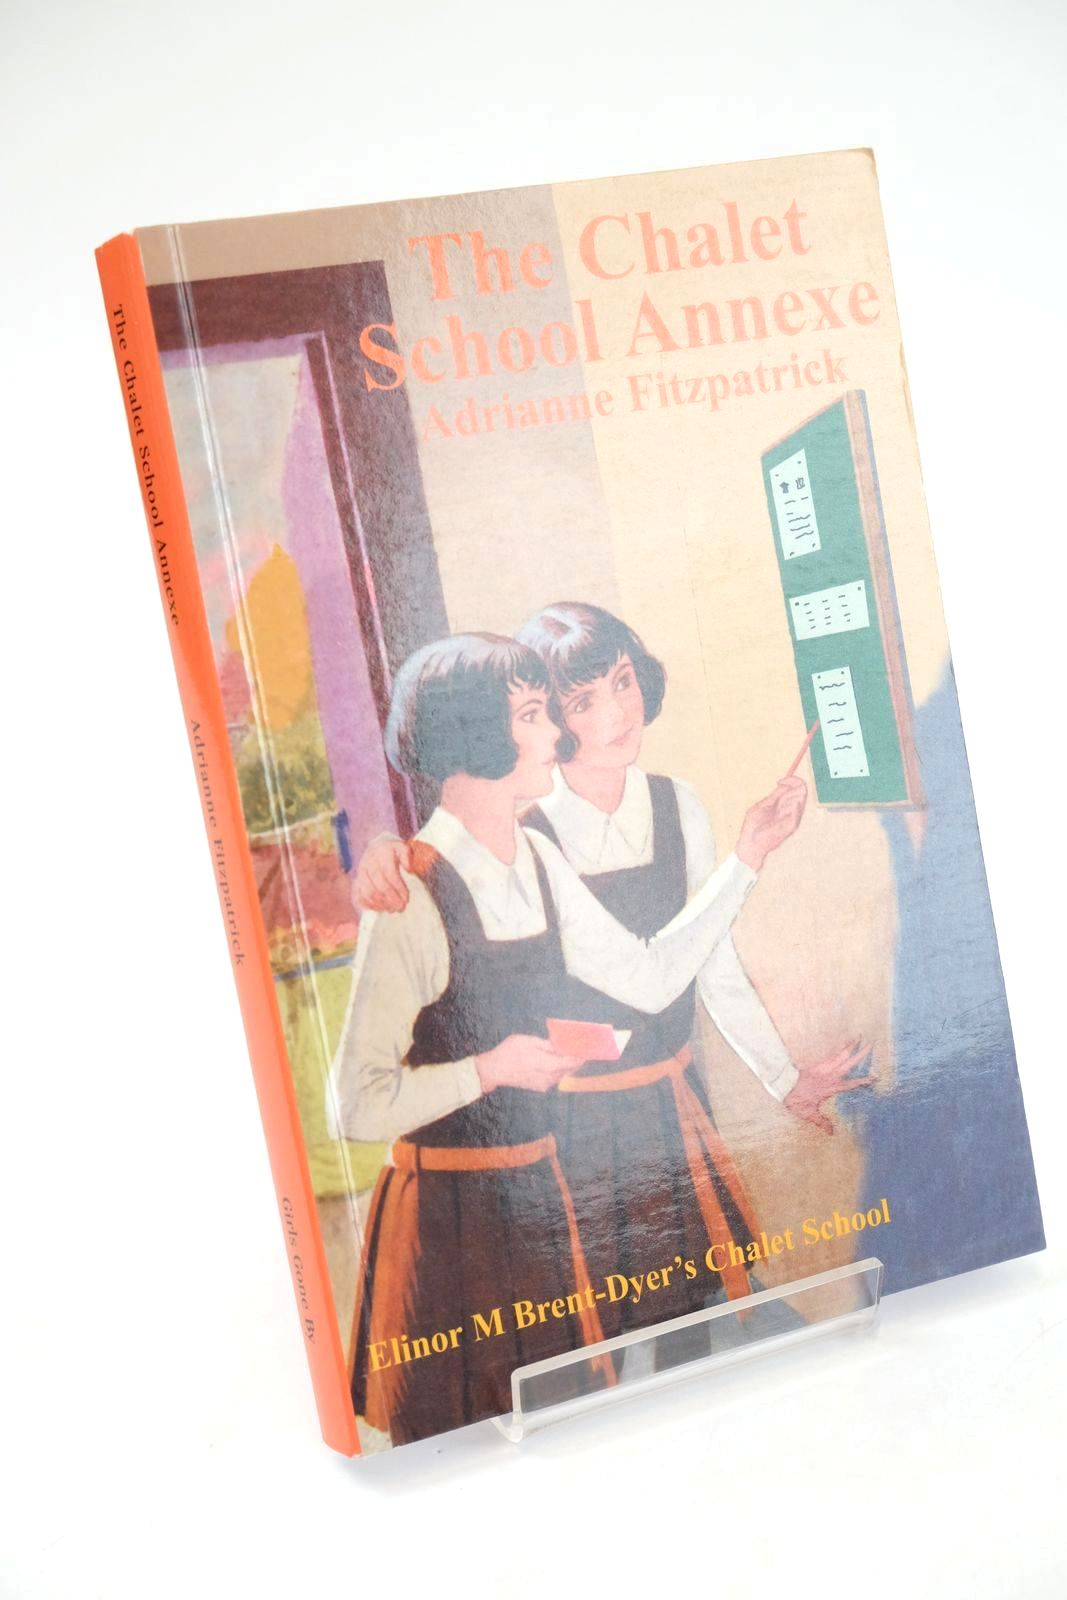 Photo of THE CHALET SCHOOL ANNEXE written by Fitzpatrick, Adrianne published by Girls Gone By (STOCK CODE: 1324449)  for sale by Stella & Rose's Books